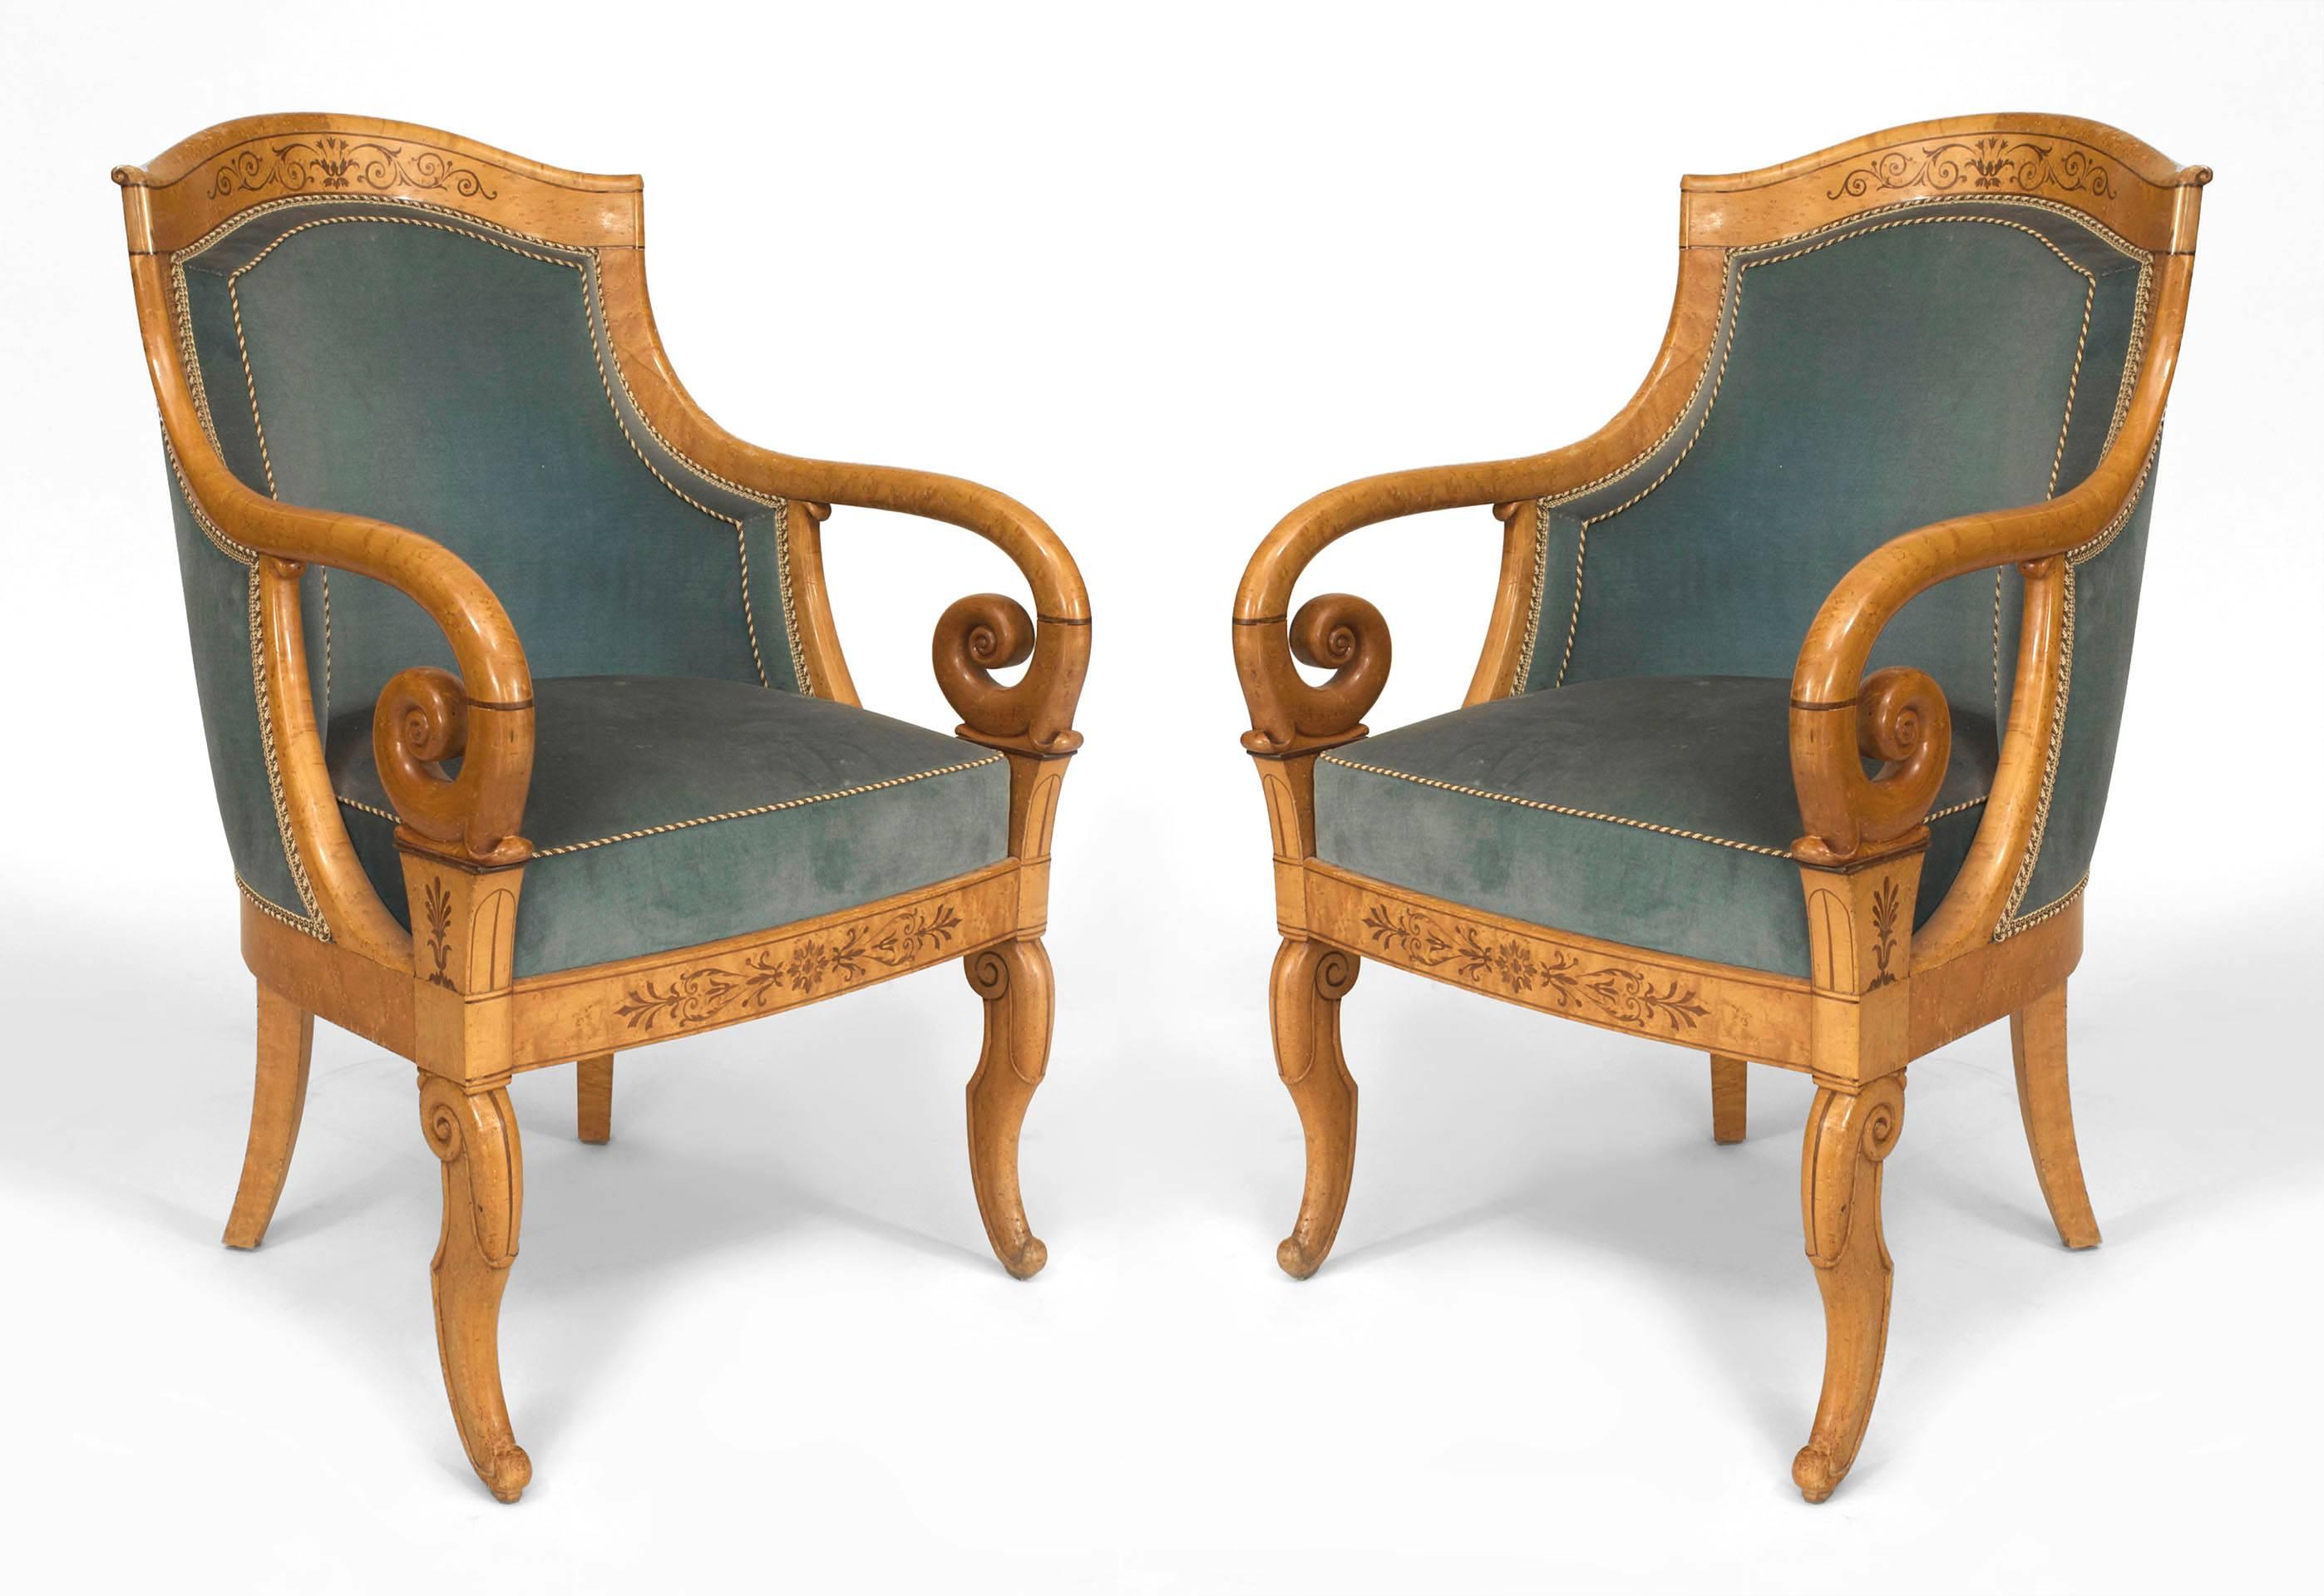 Pair of French Charles X maple round tub back Armchairs with rosewood inlaid trim and roll arms with light blue velvet upholstery
